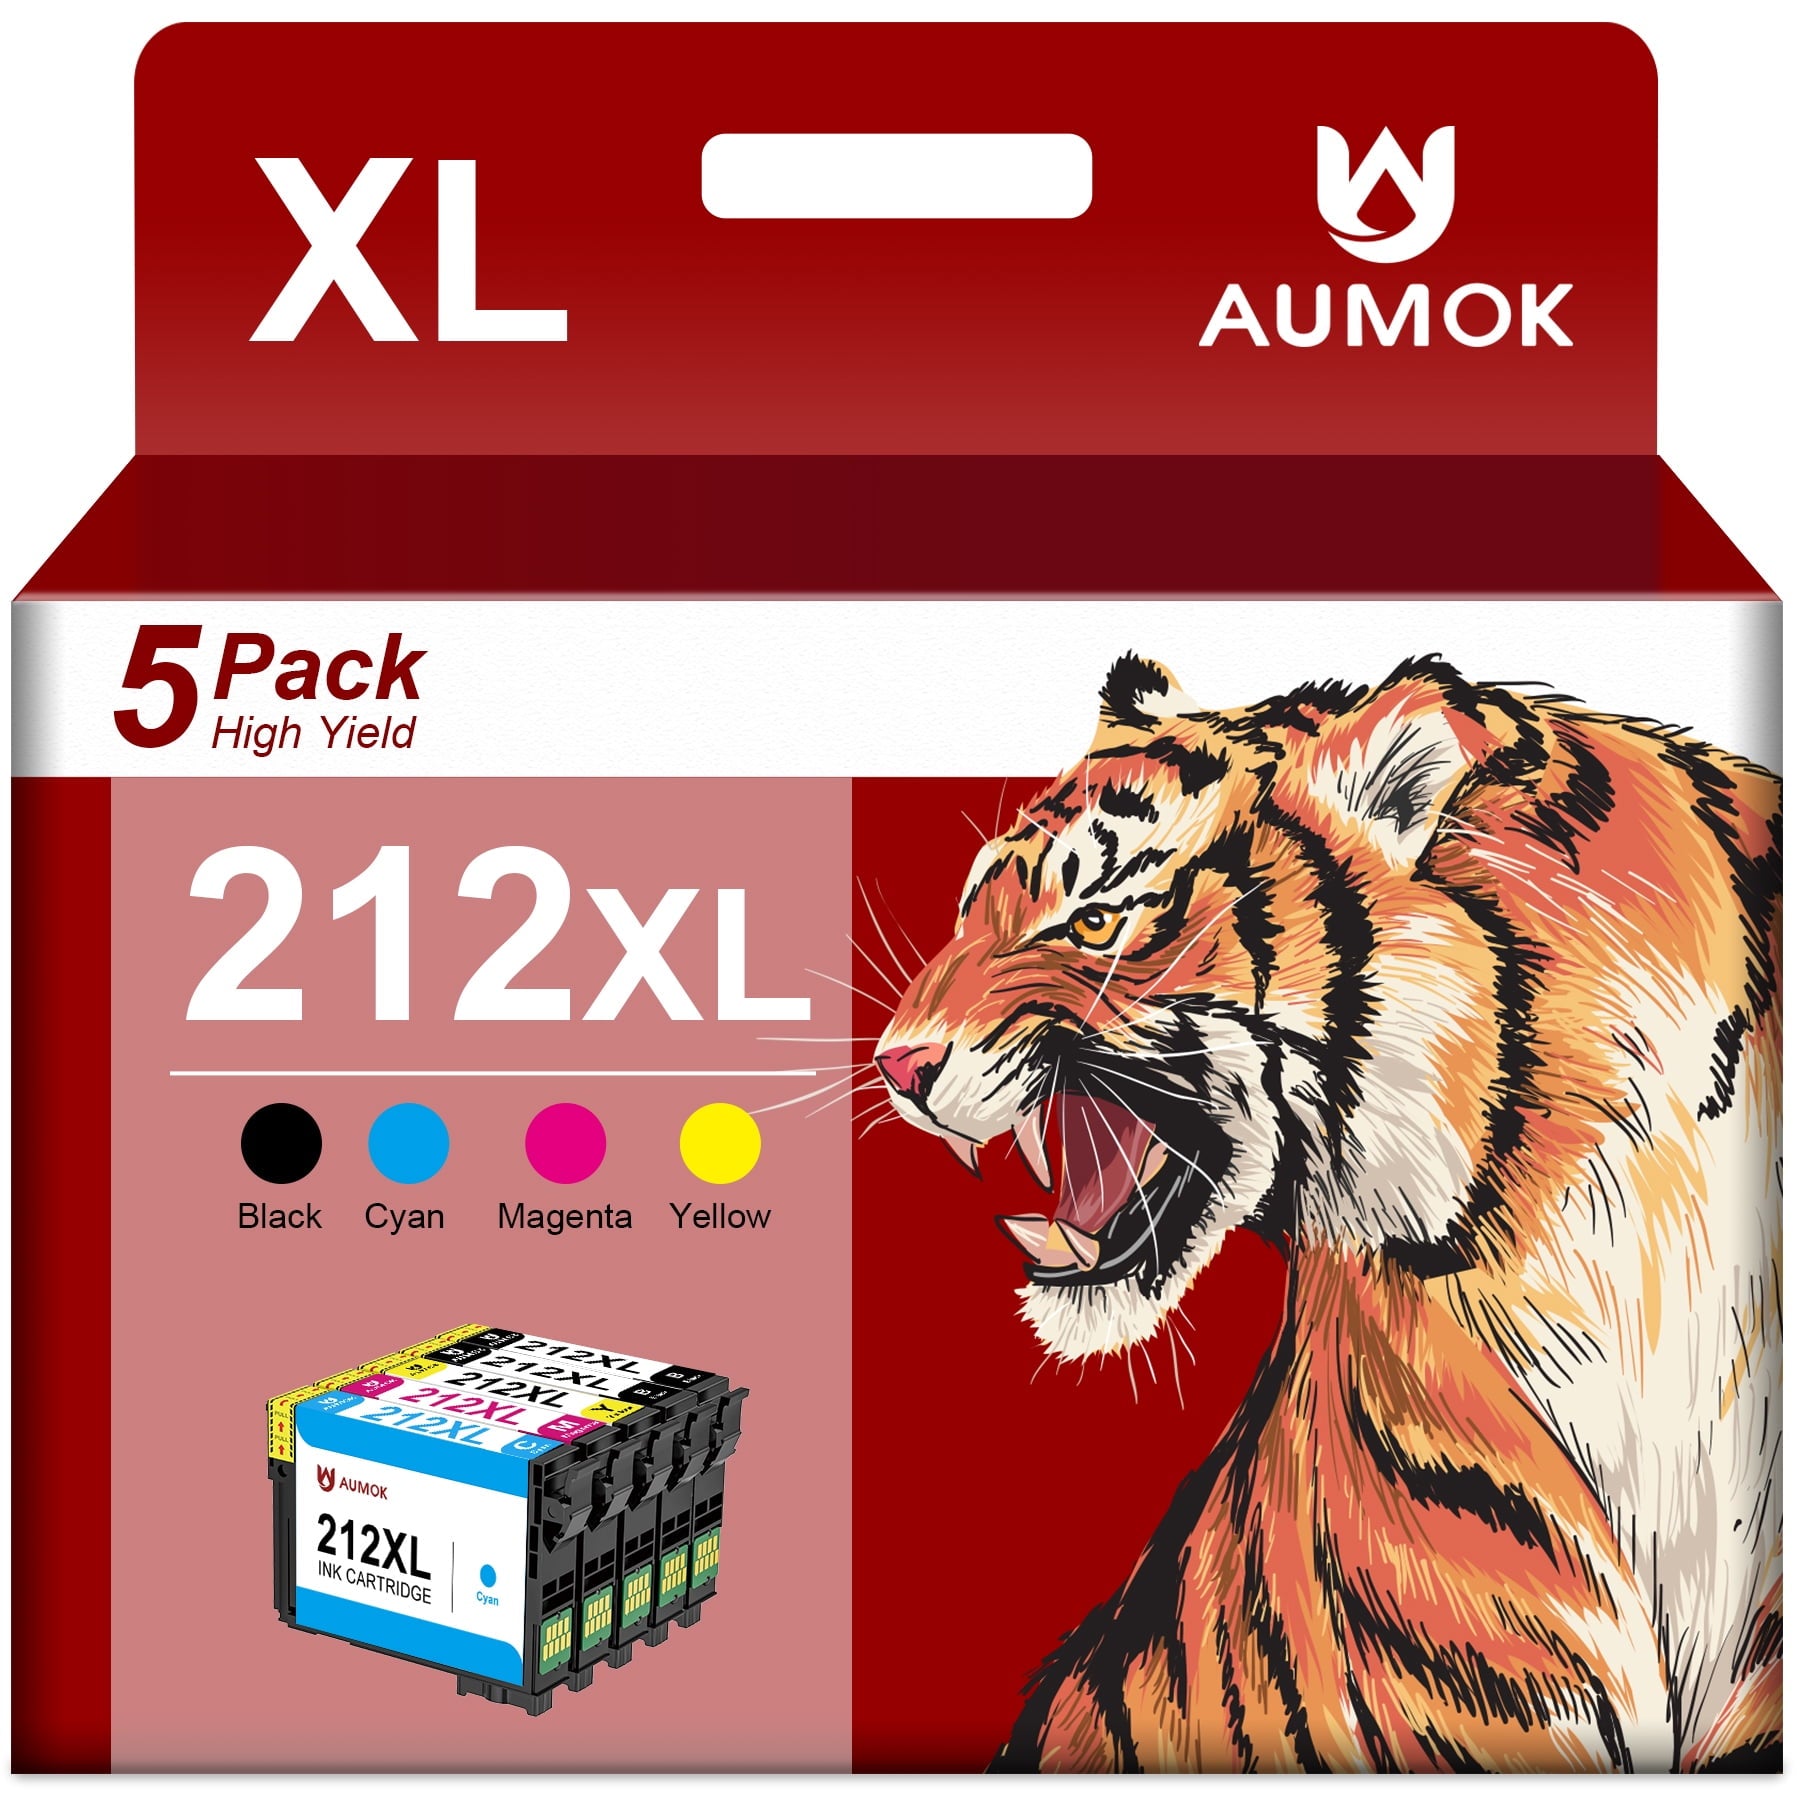 212 XL High Yield Black & Color Combo Ink Cartridges 212XL for Epson Printer (5-Pack 2 Black Cyan Magenta Yellow)